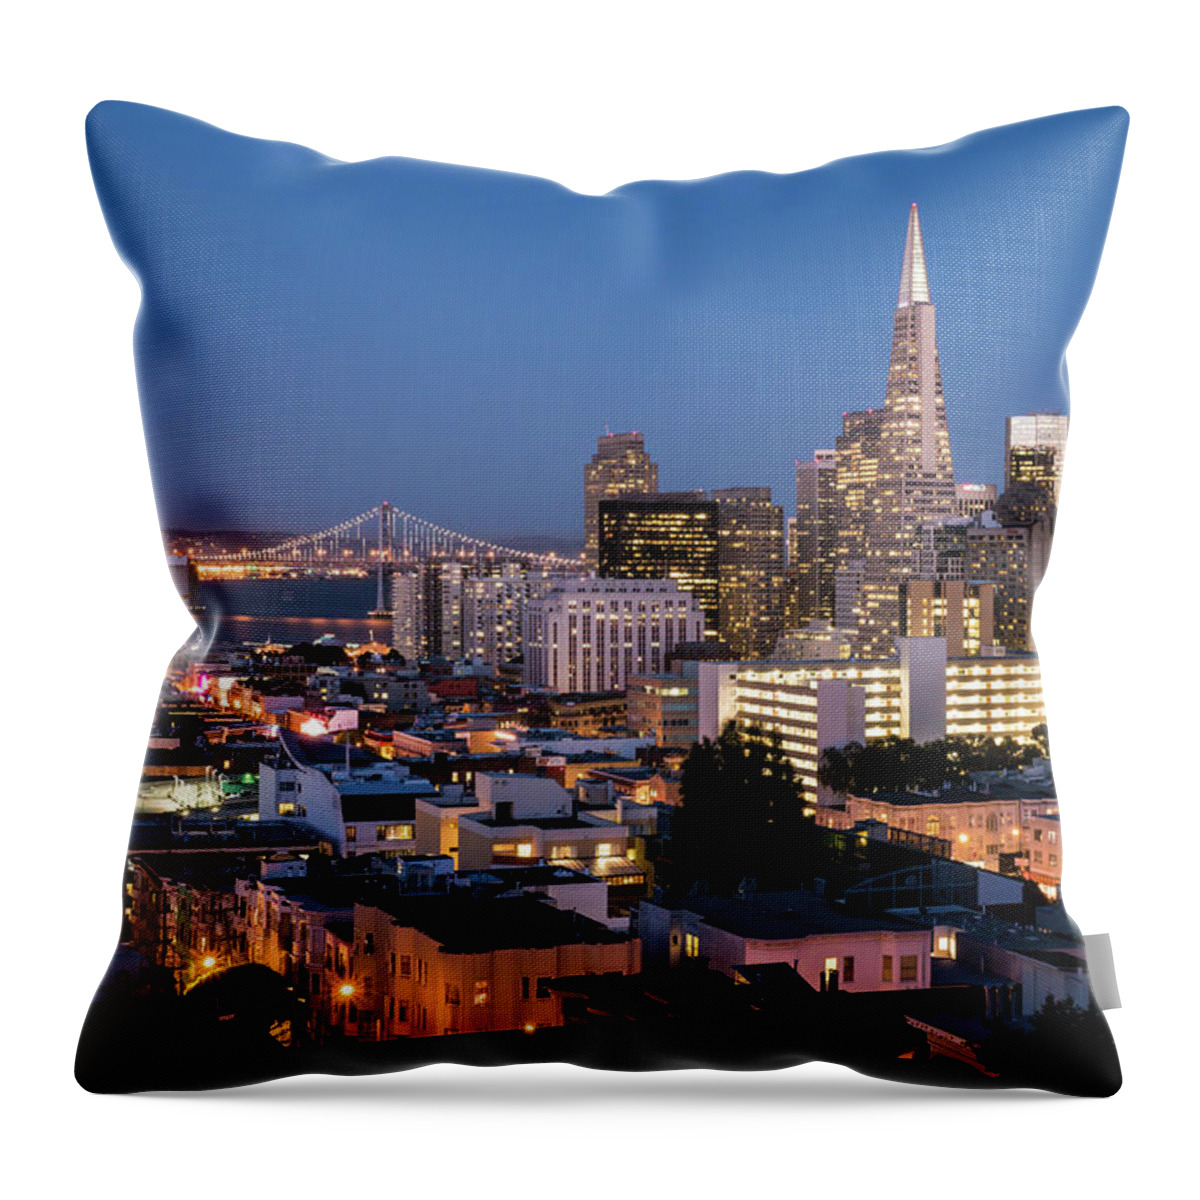 San Francisco Throw Pillow featuring the photograph Russian Hill Blue View by Michael Lee